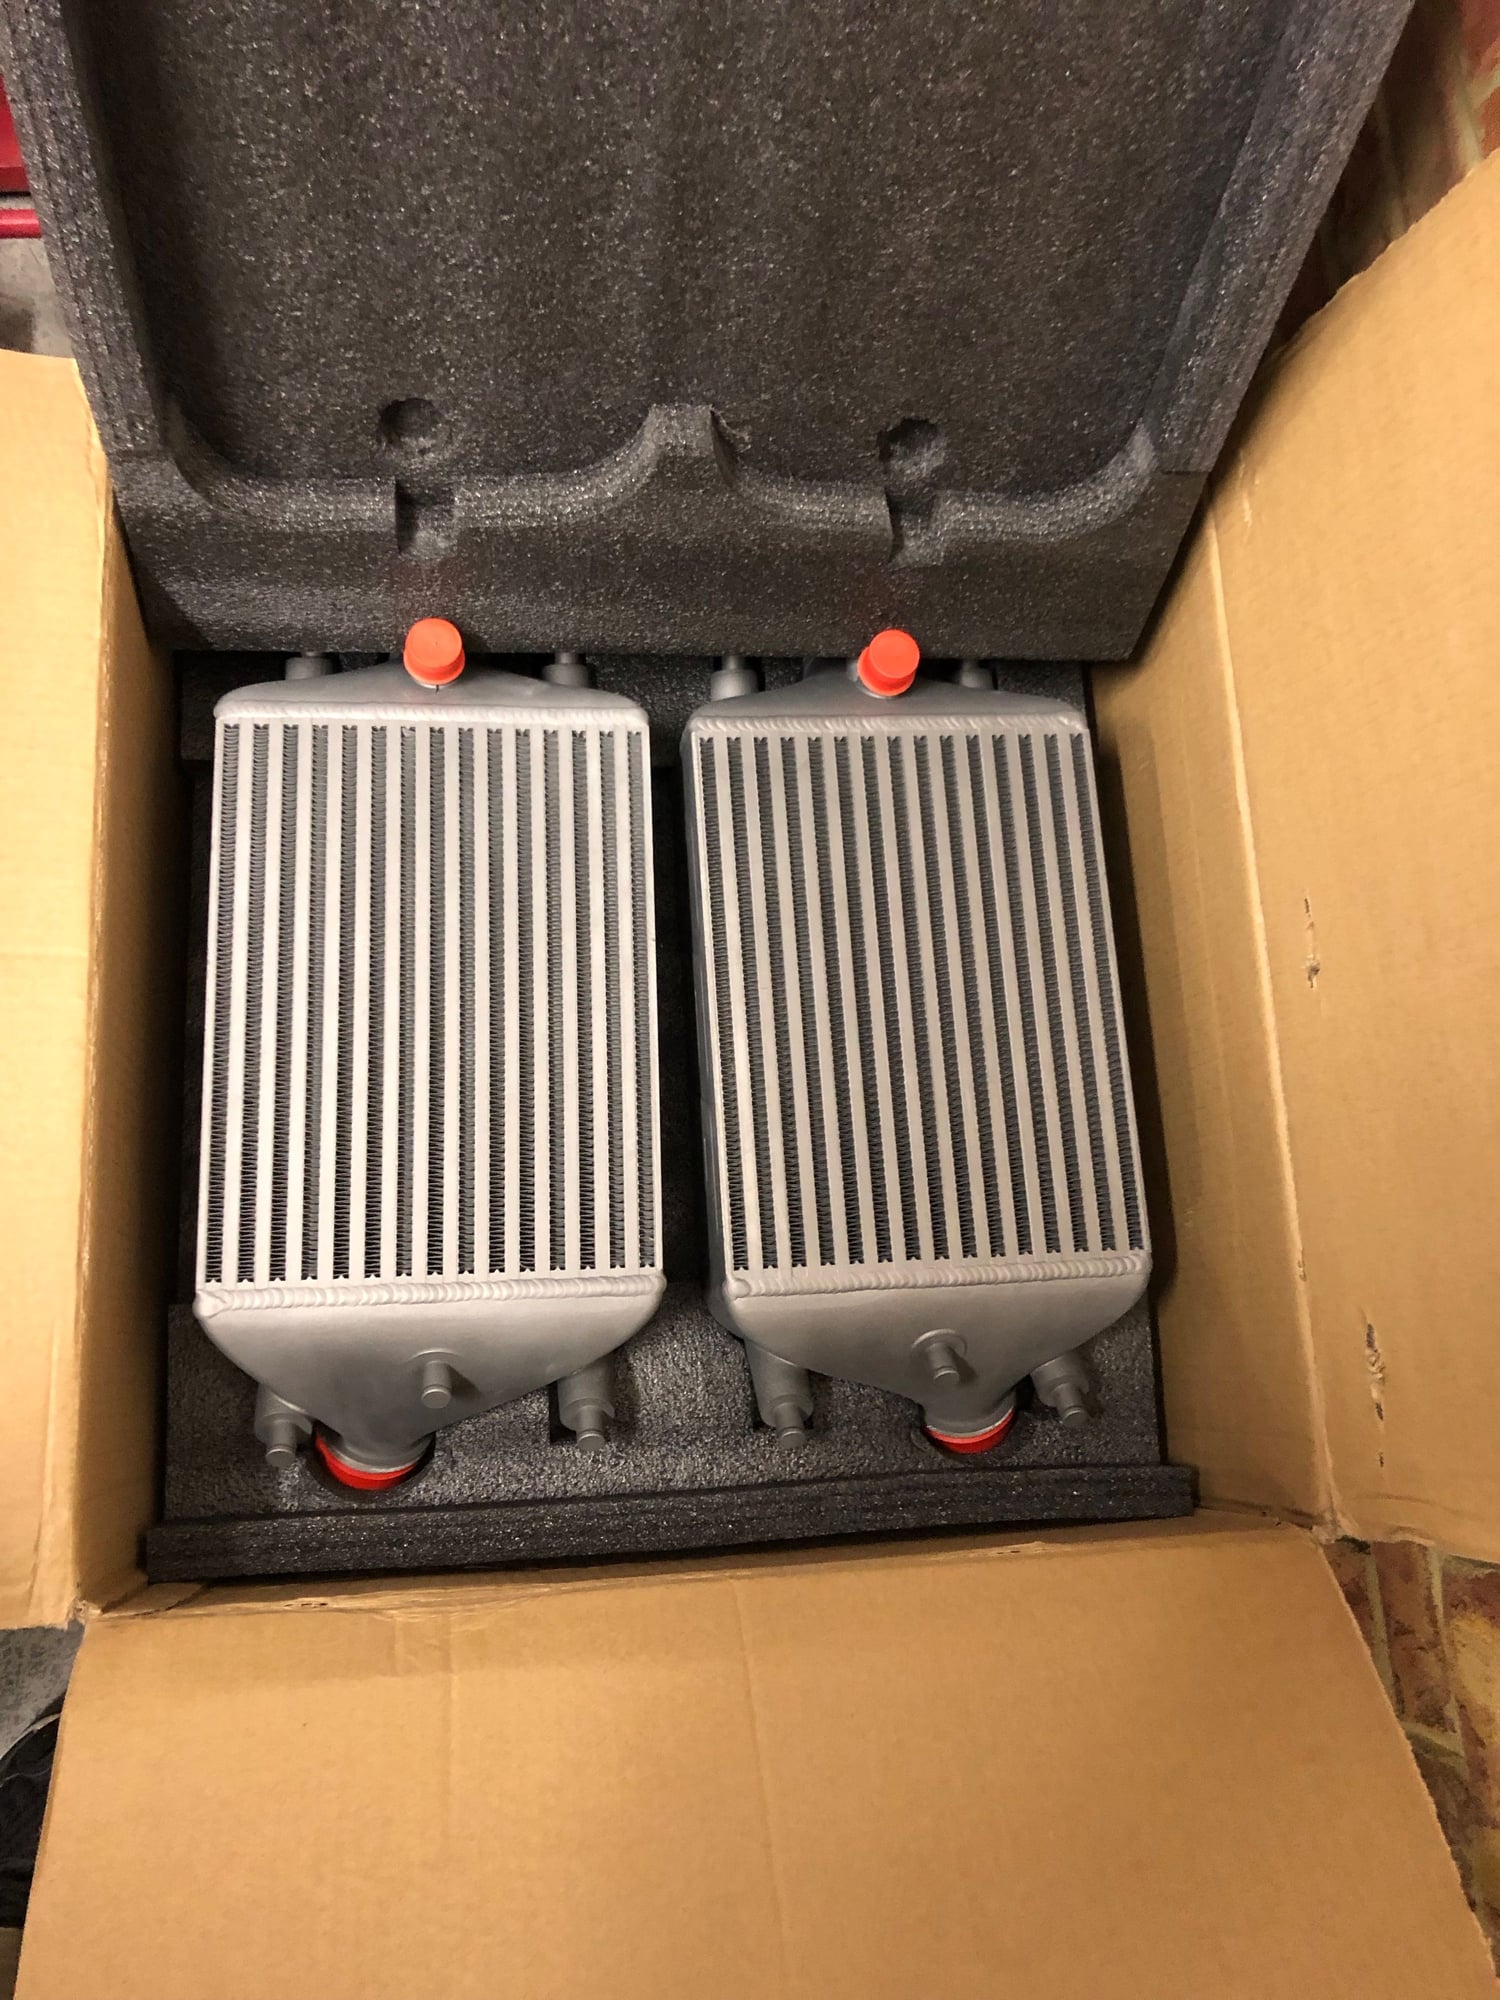 Engine - Intake/Fuel - Brand new CSF intercoolers for Turbo and Turbo S 991.1 and 991.2 - New - 2014 to 2019 Porsche 911 - Abingdon, VA 24211, United States